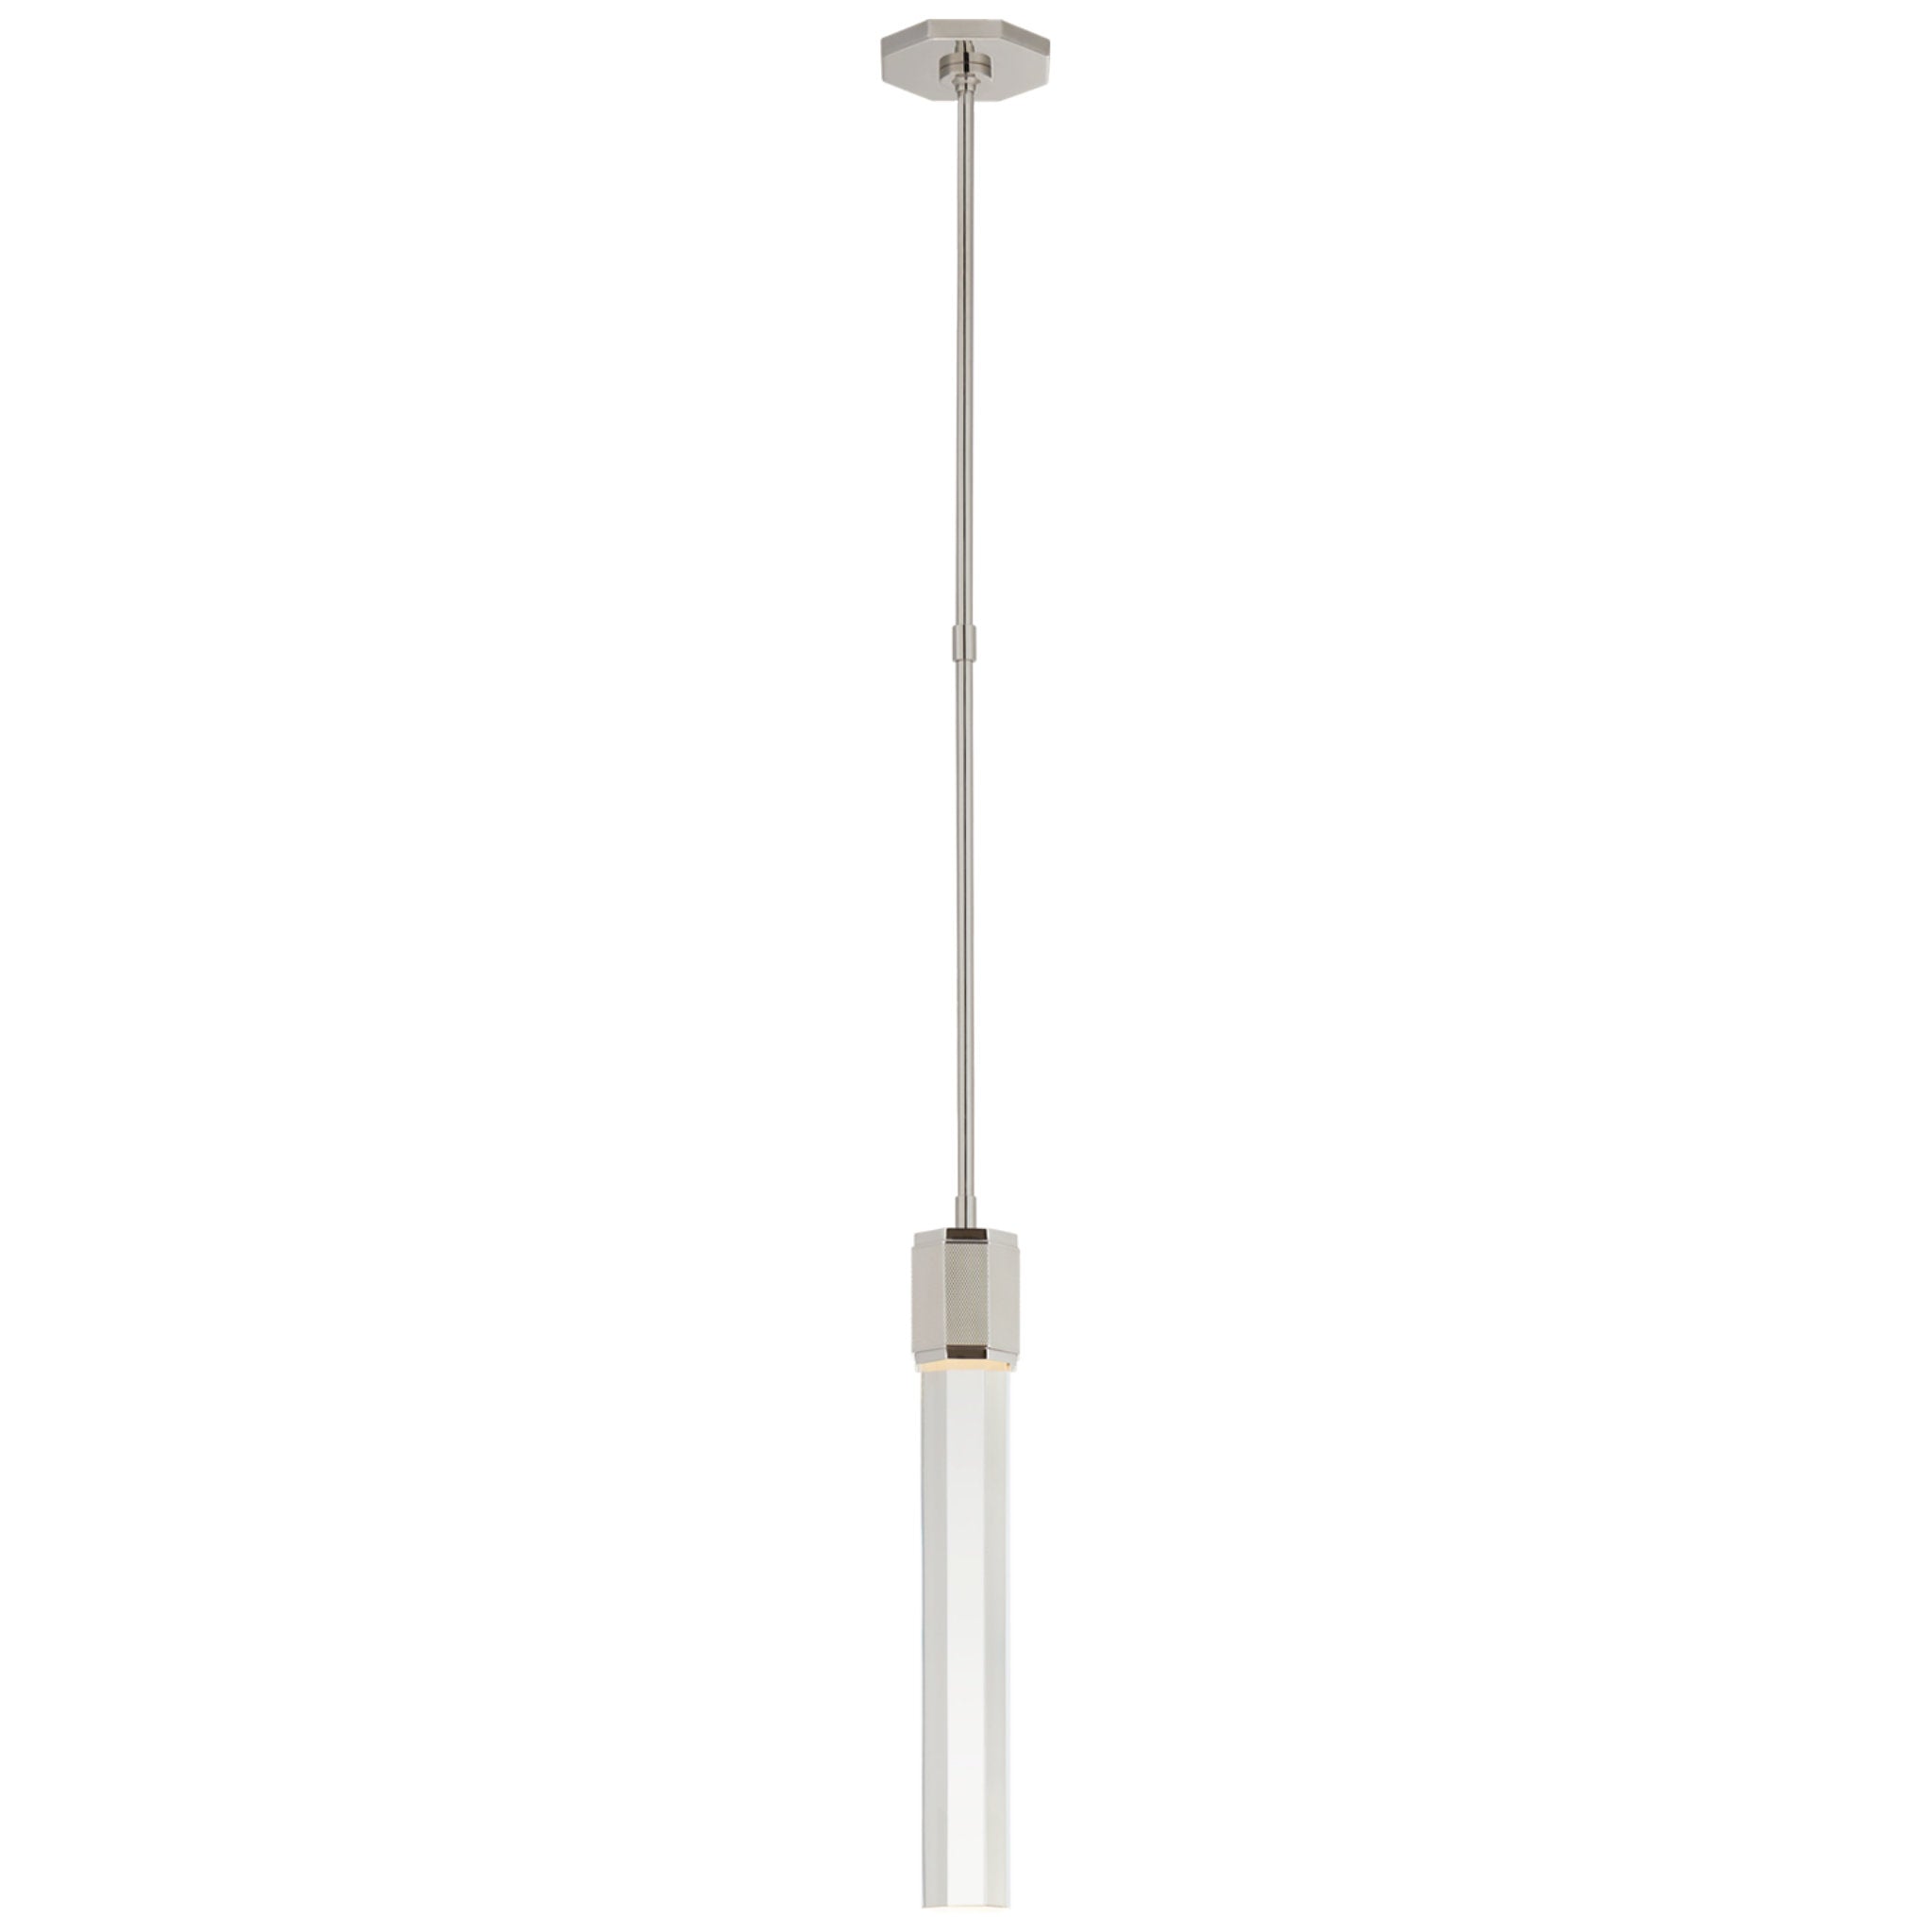 Lauren Rottet Fascio Single Pendant in Polished Nickel with Crystal